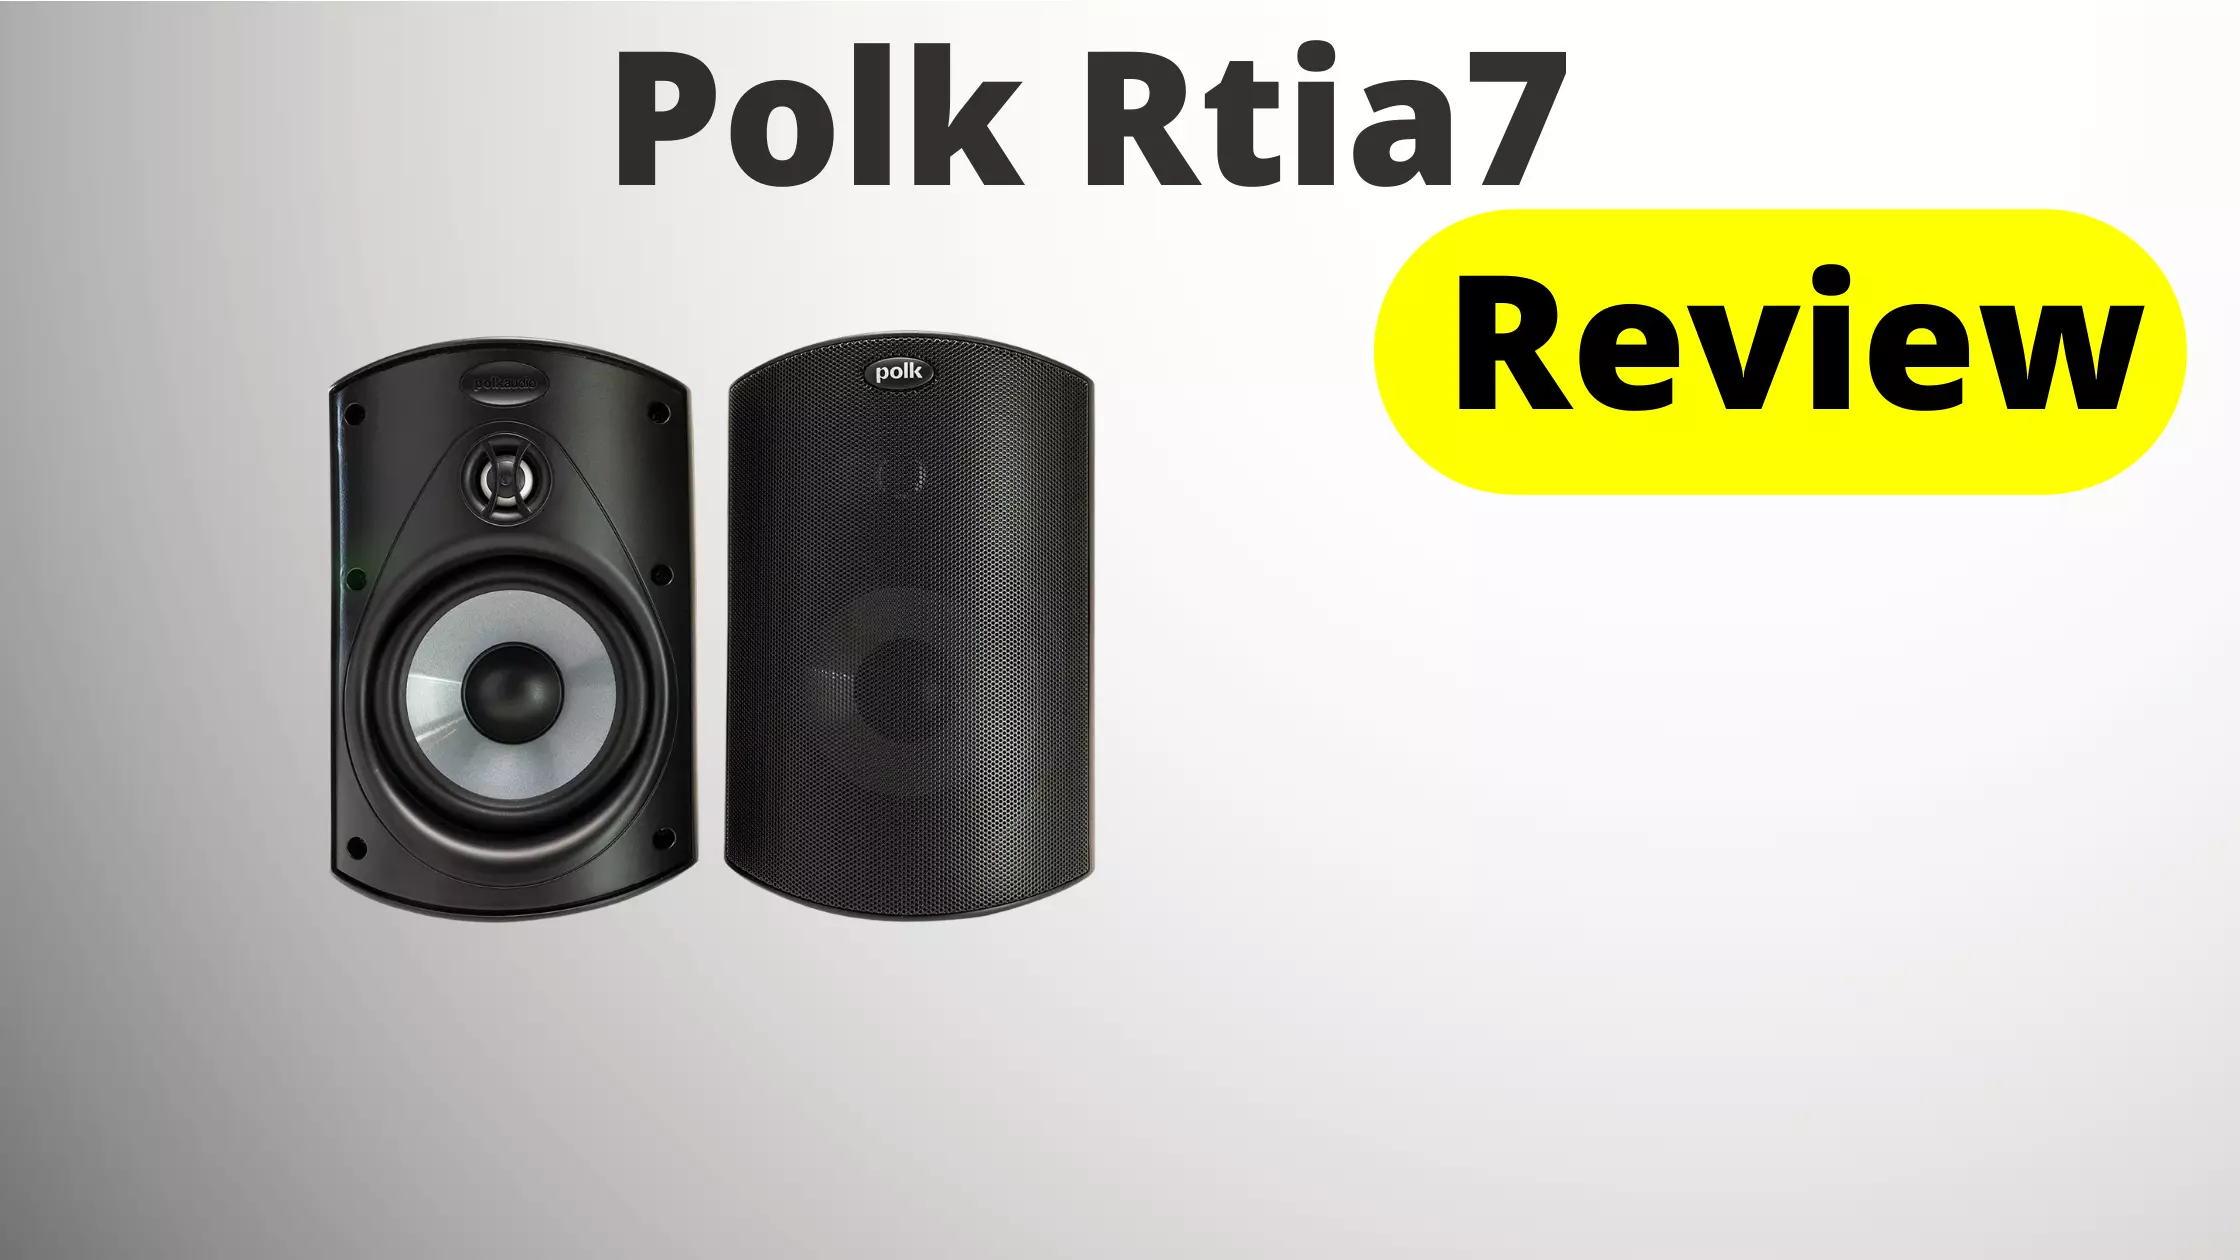 Polk rti A7 Review - Top Rated